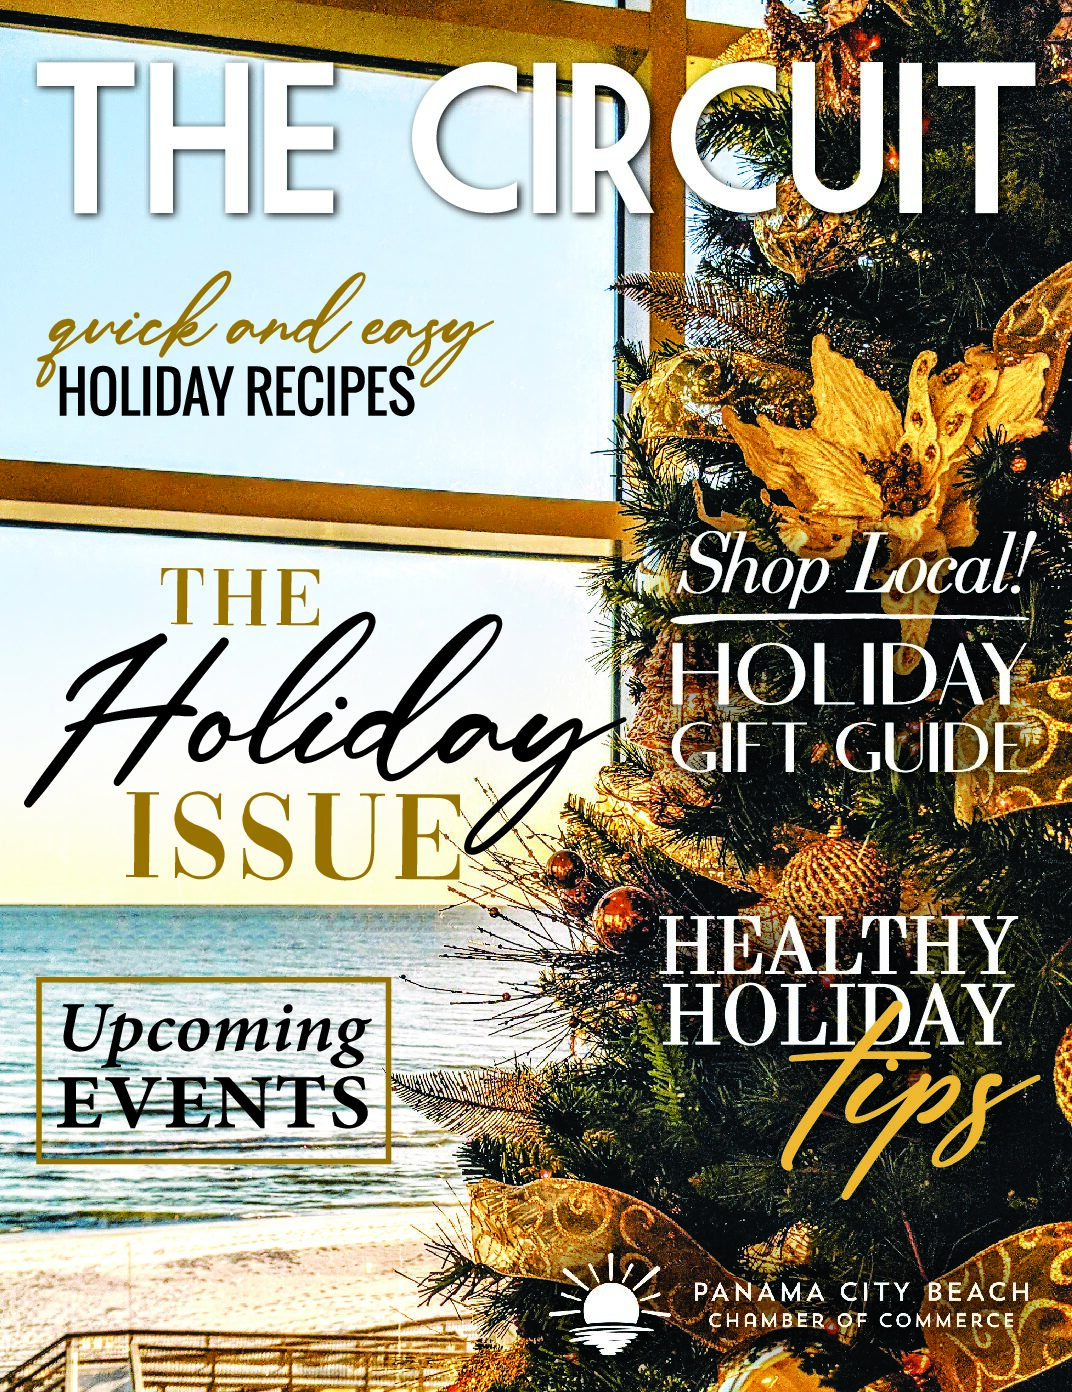 NOV/DEC 2021 – The Holiday Issue